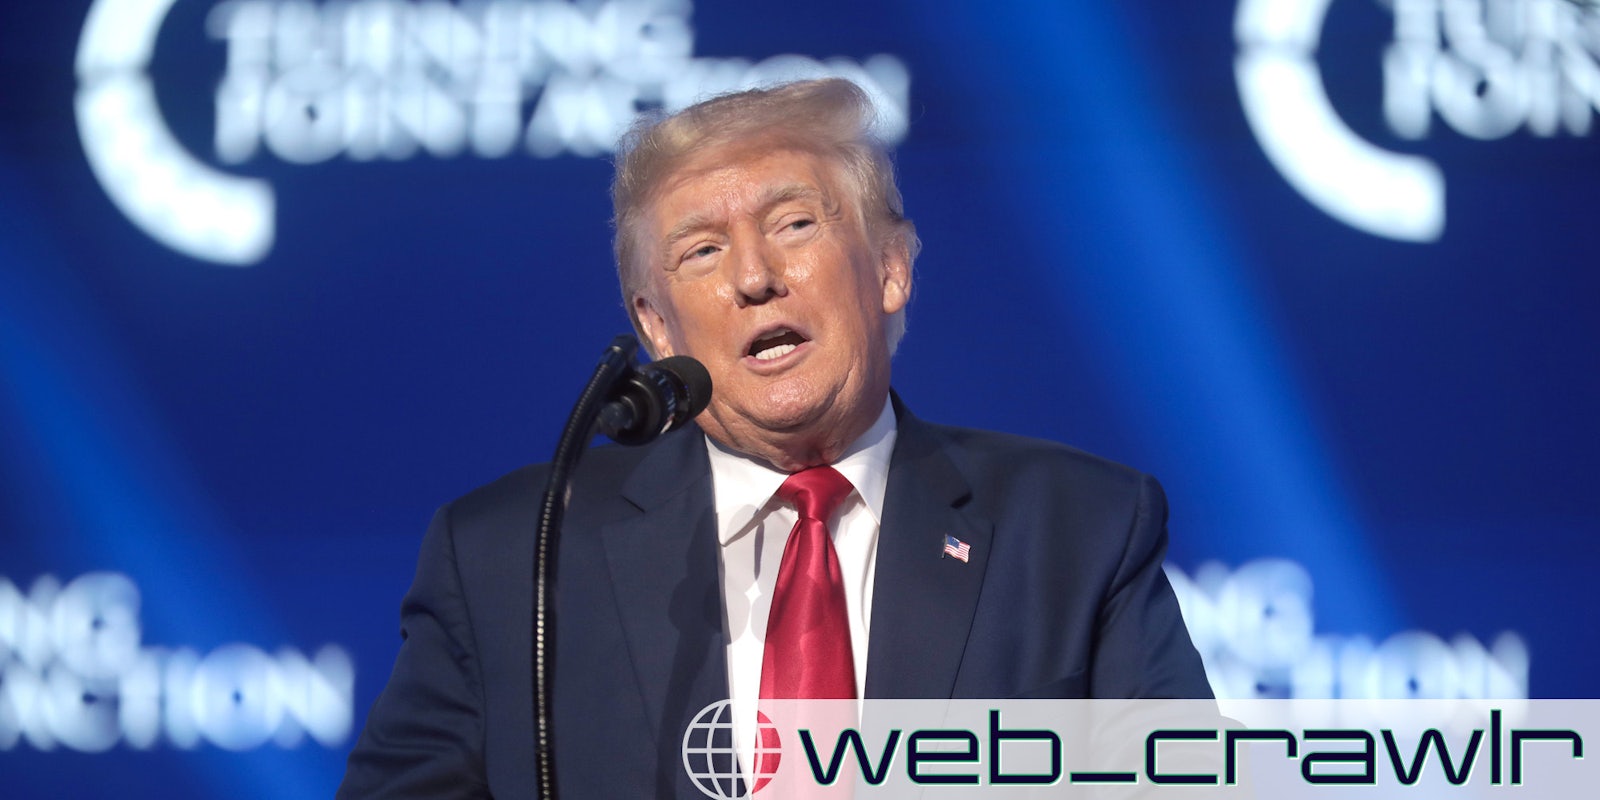 Former President Donald Trump speaking into a microphone. The Daily Dot newsletter logo is in the bottom right corner.